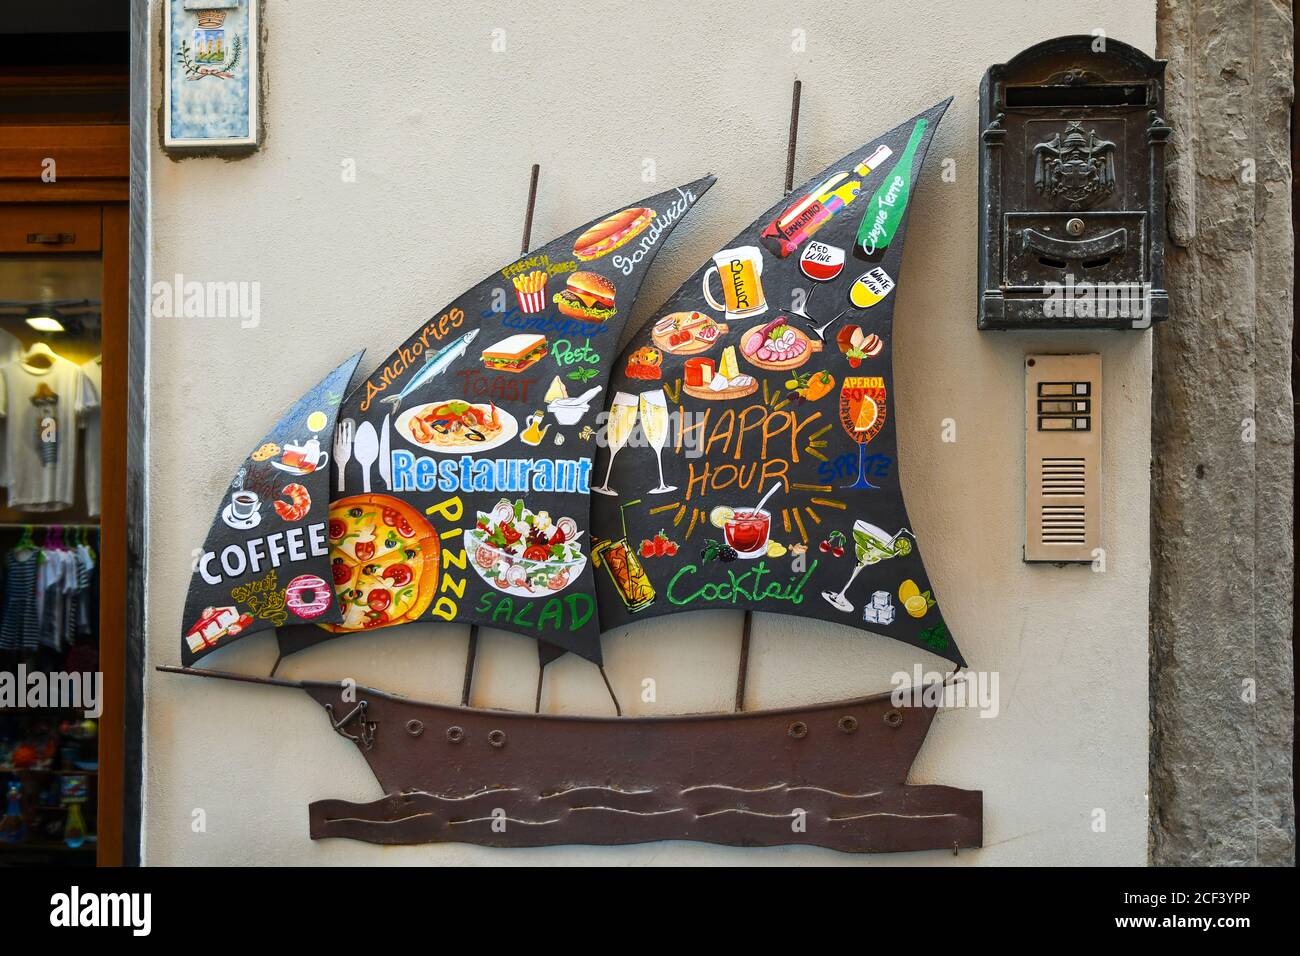 Close-up of a metal restaurant sign in the shape of a sail boat with paintings of different types of food and drinks, Porto Venere, La Spezia, Italy Stock Photo